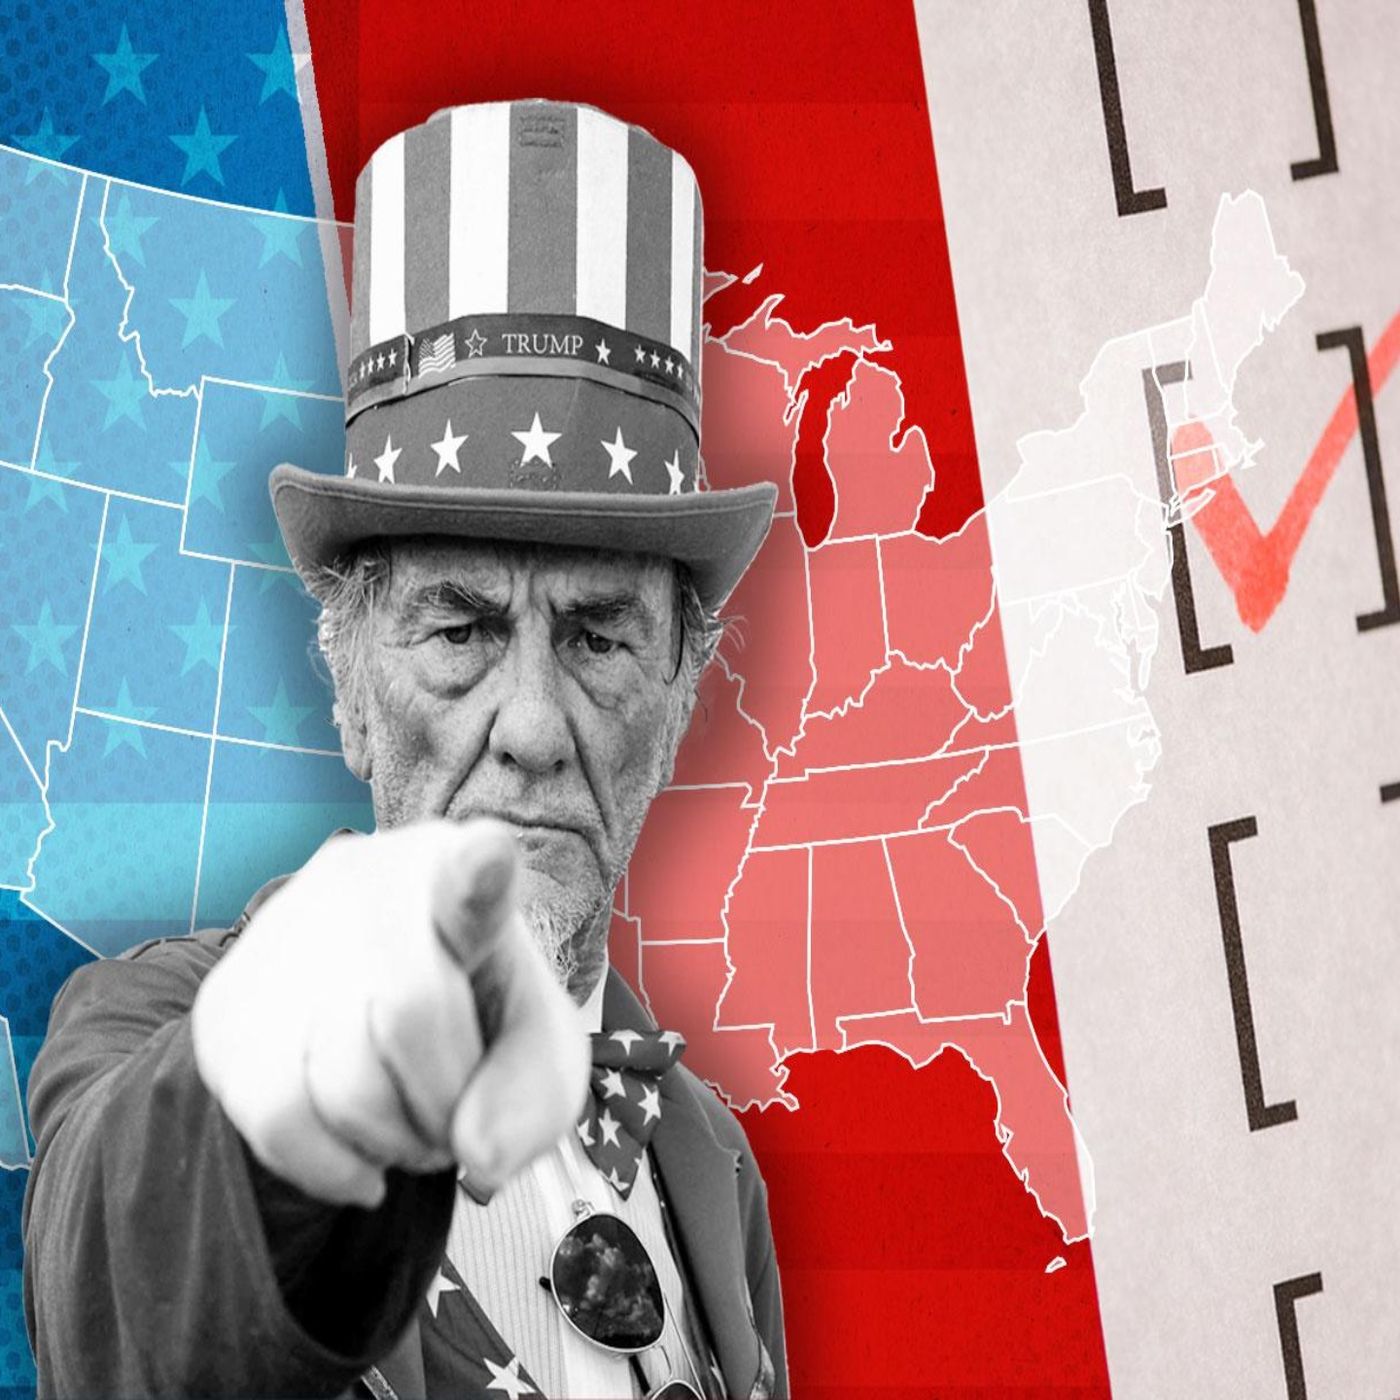 US Midterms - can the country resolve its divisions?